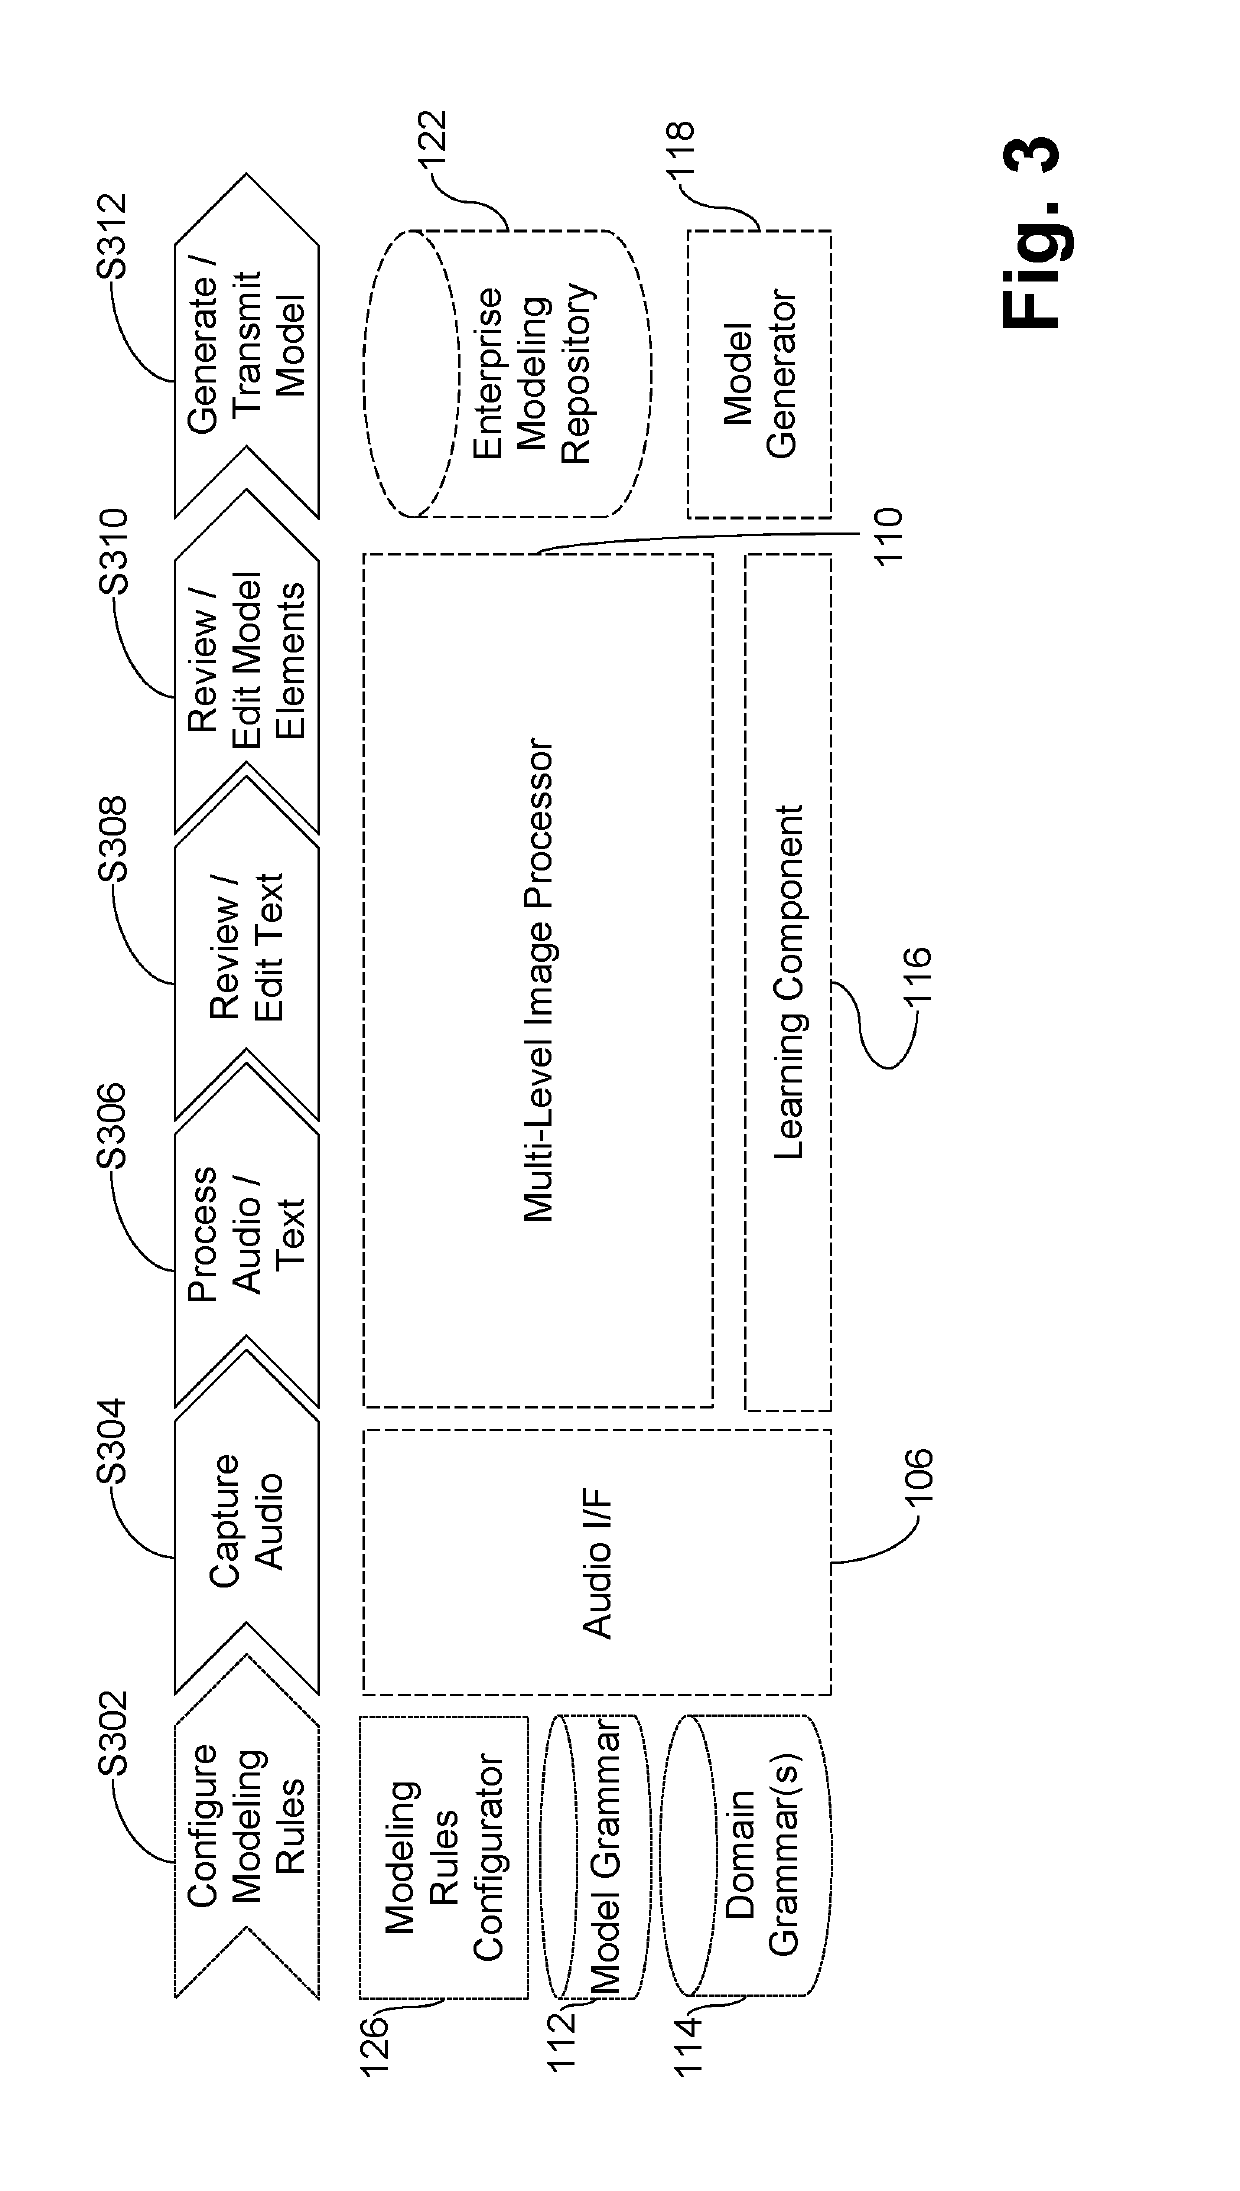 System and/or method for interactive natural semantic digitization of enterprise process models